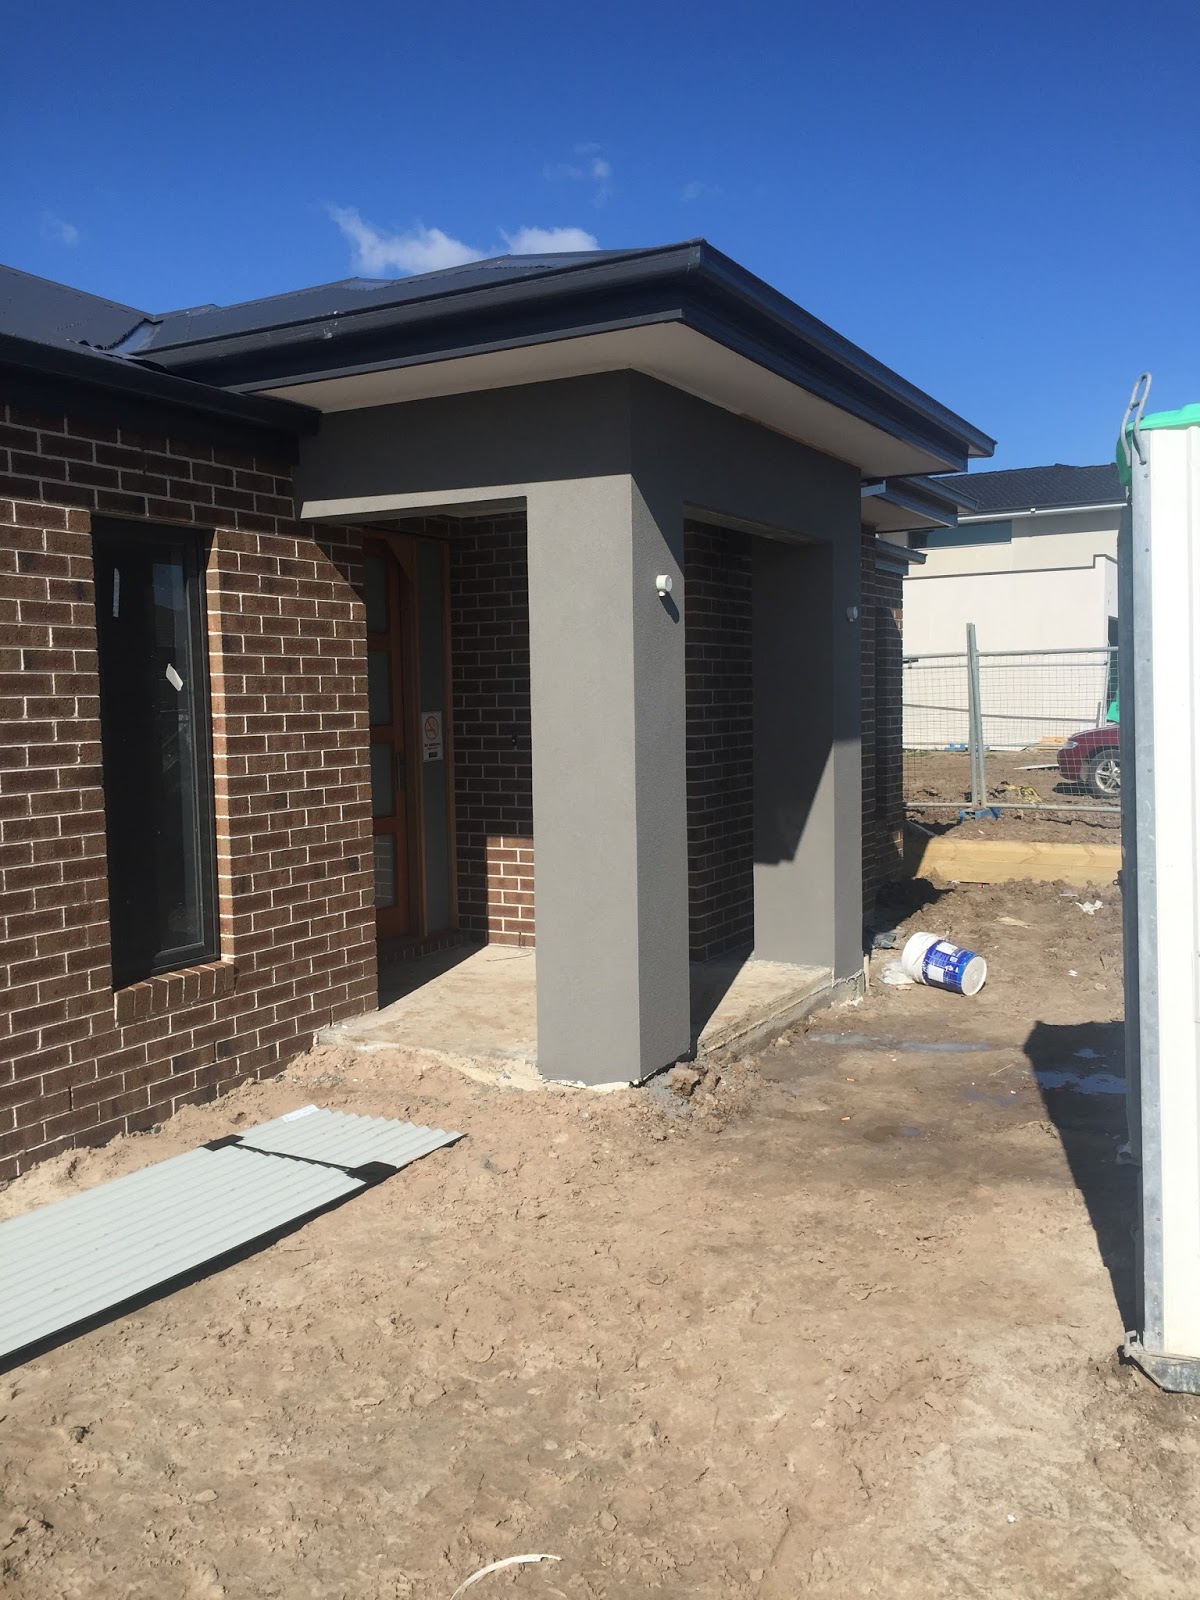 Dunedin 29 - Our First Home: Portico/Pillar render painted